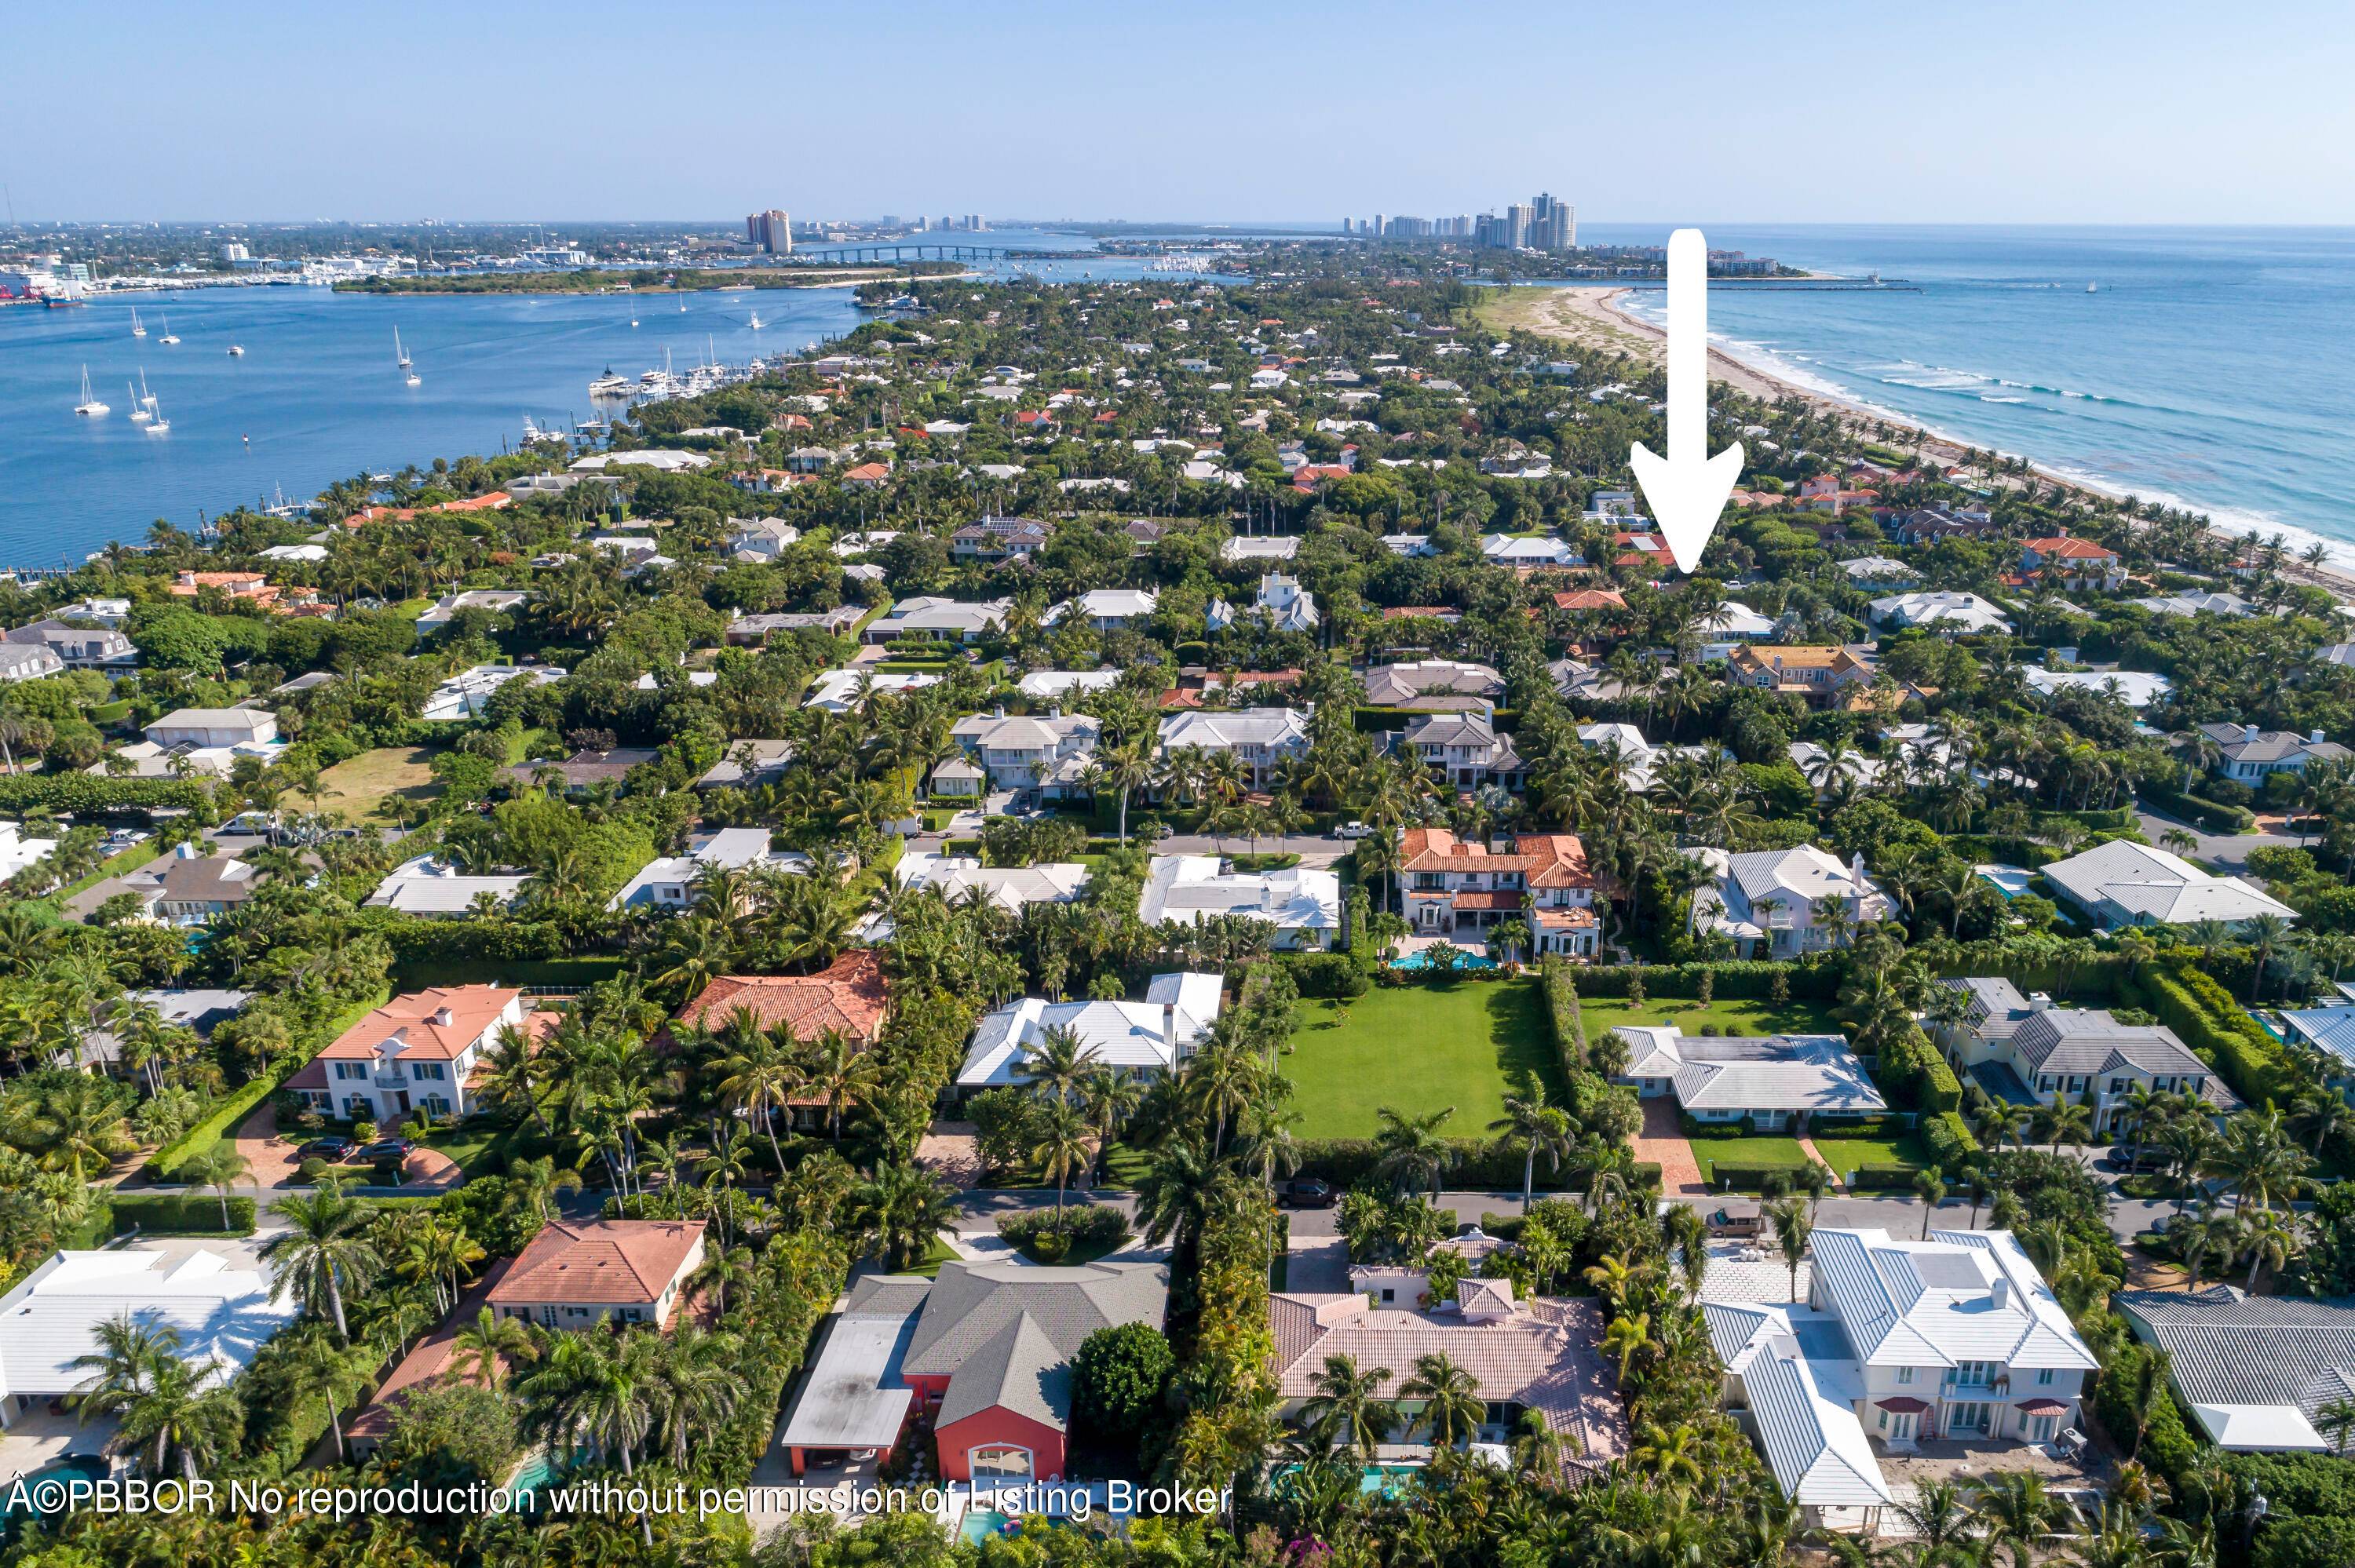 Utmost sophistication for this amazing new Palm Beach property on almost half an acre with private beach access and oceanfront deck.